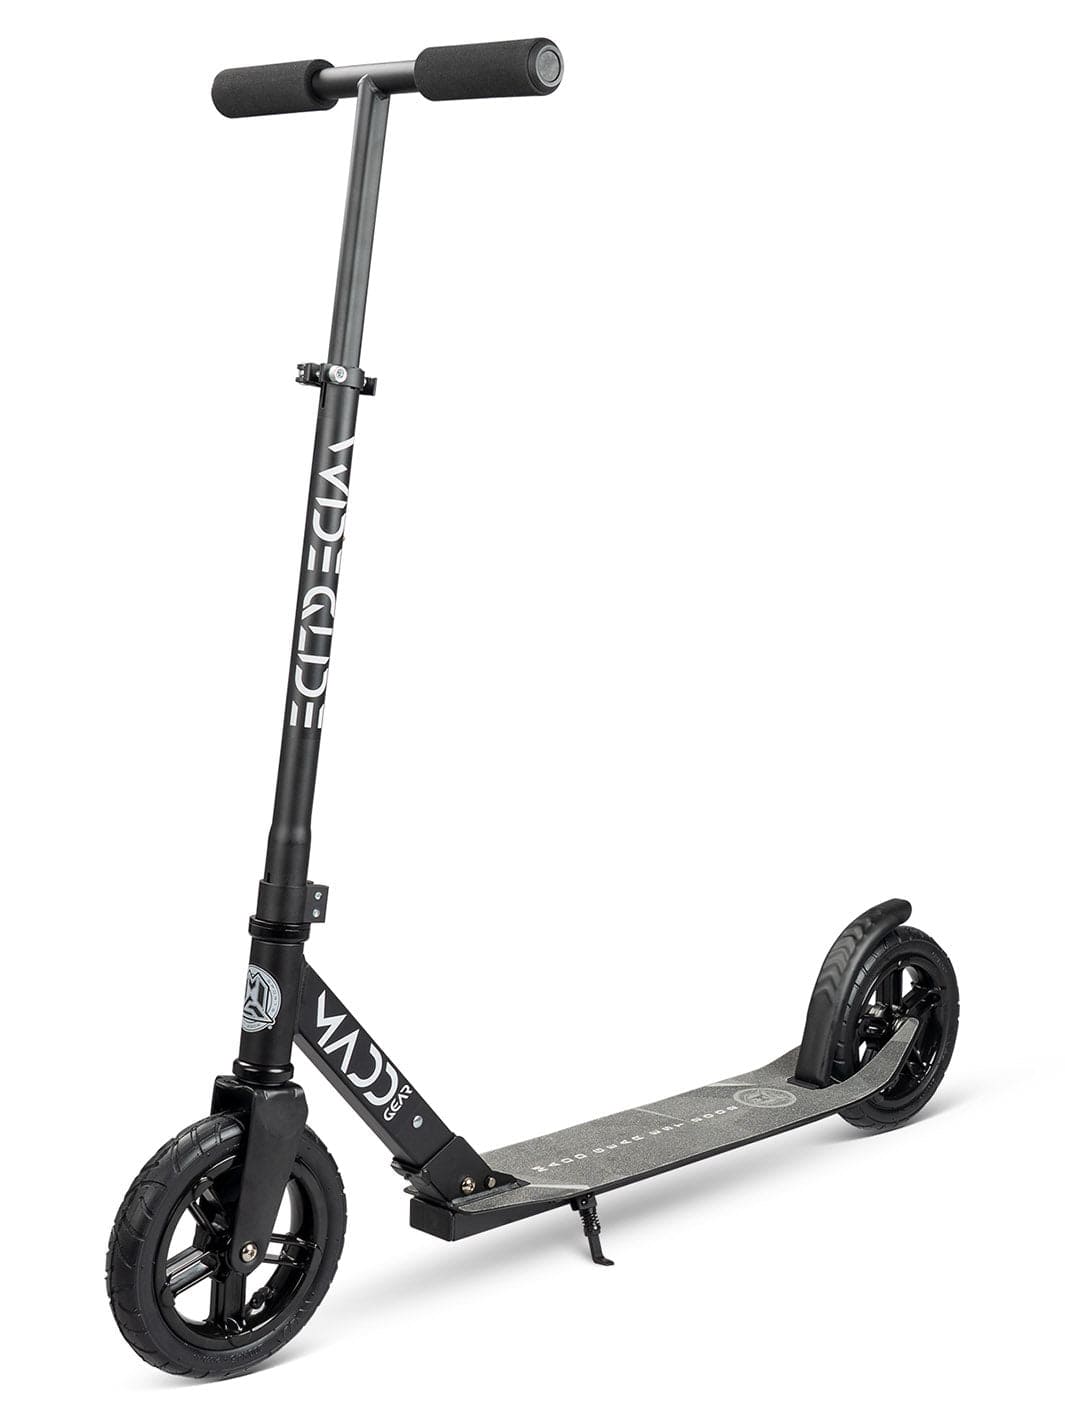 Madd Gear MGP Renegade folding razor a5 lux complete scooter kids adults youth black